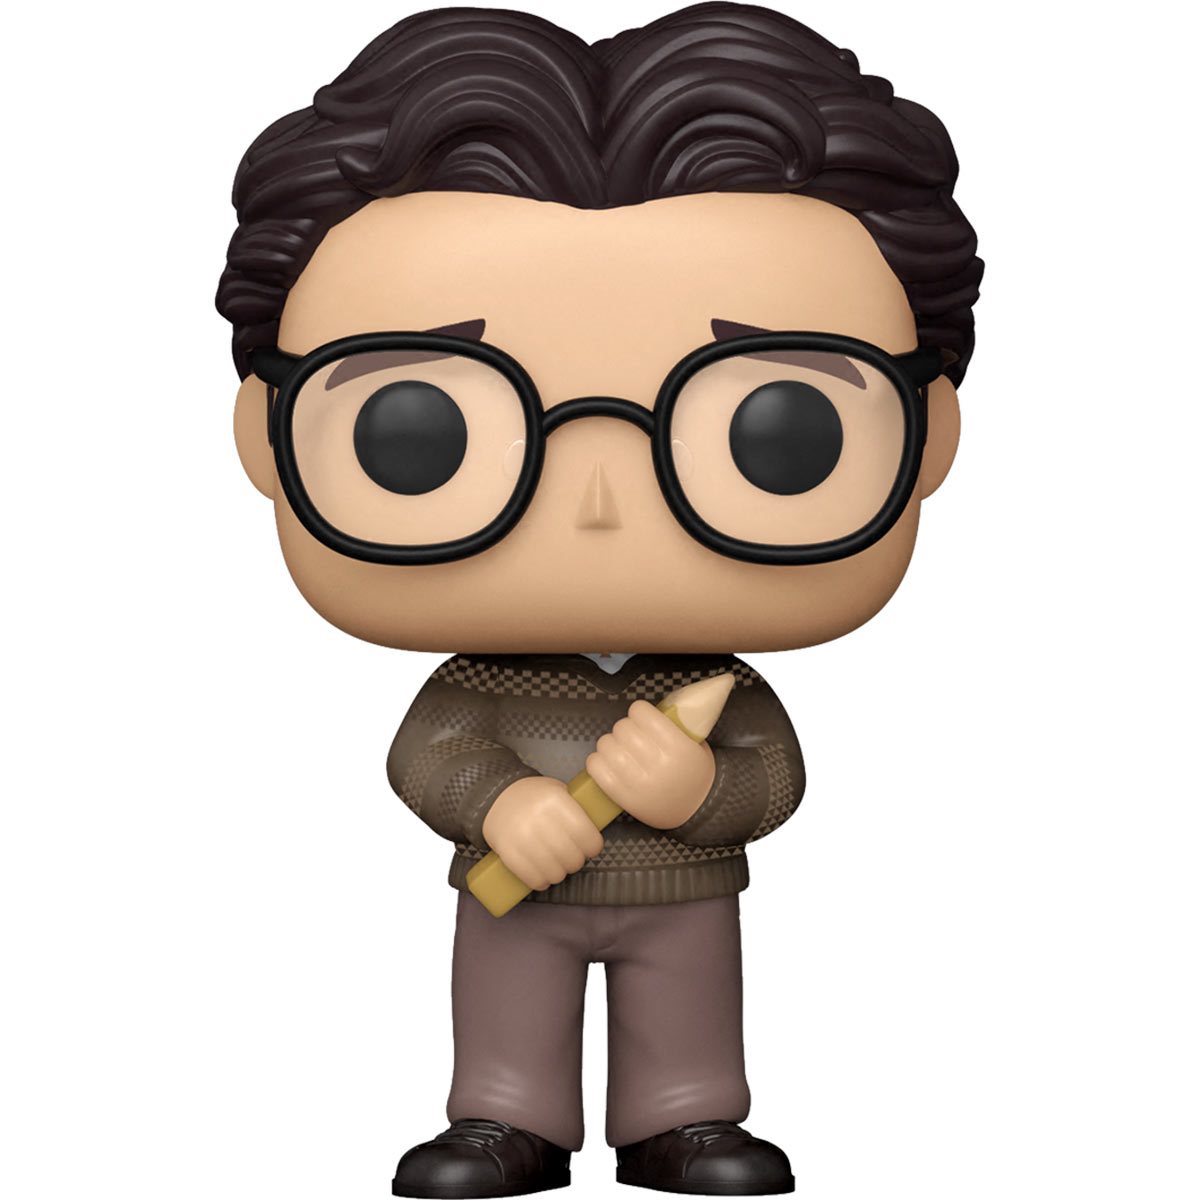 Guillermo What We Do in the Shadows Pop! Vinyl Figure